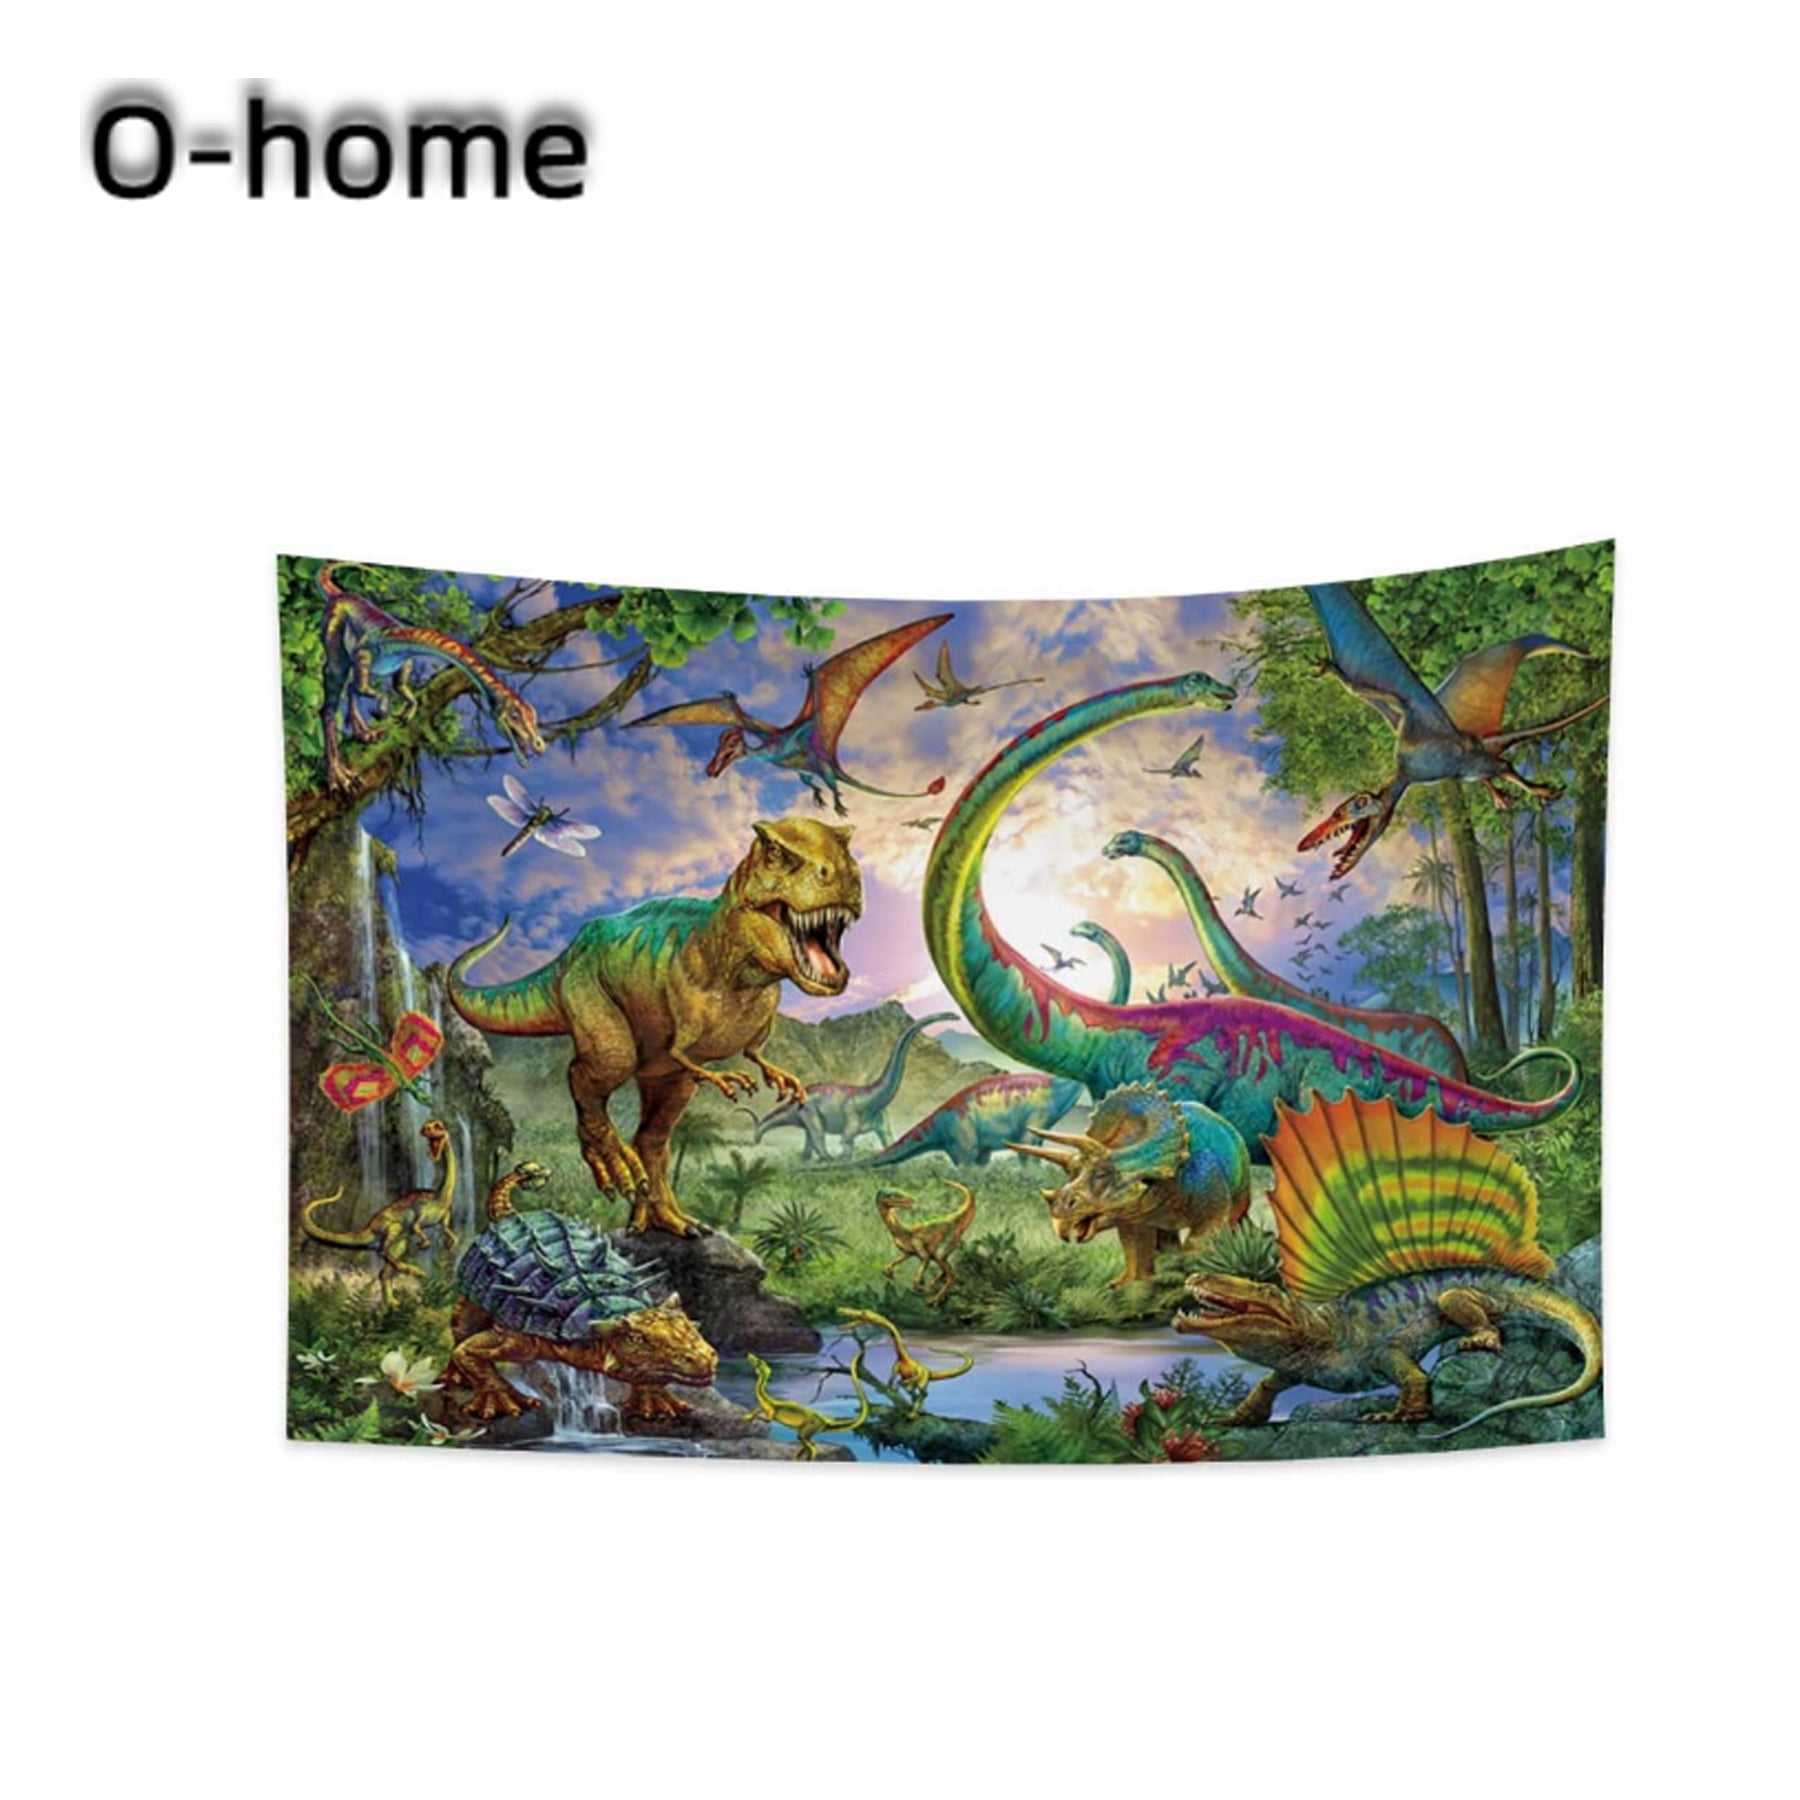 Dinosaur Tapestry Wall Hanging Cartoon Ancient Wild Animals Brachiosaurus  Tapestry Primeval Forest Plant Trees Colorful Wall Tapestry 